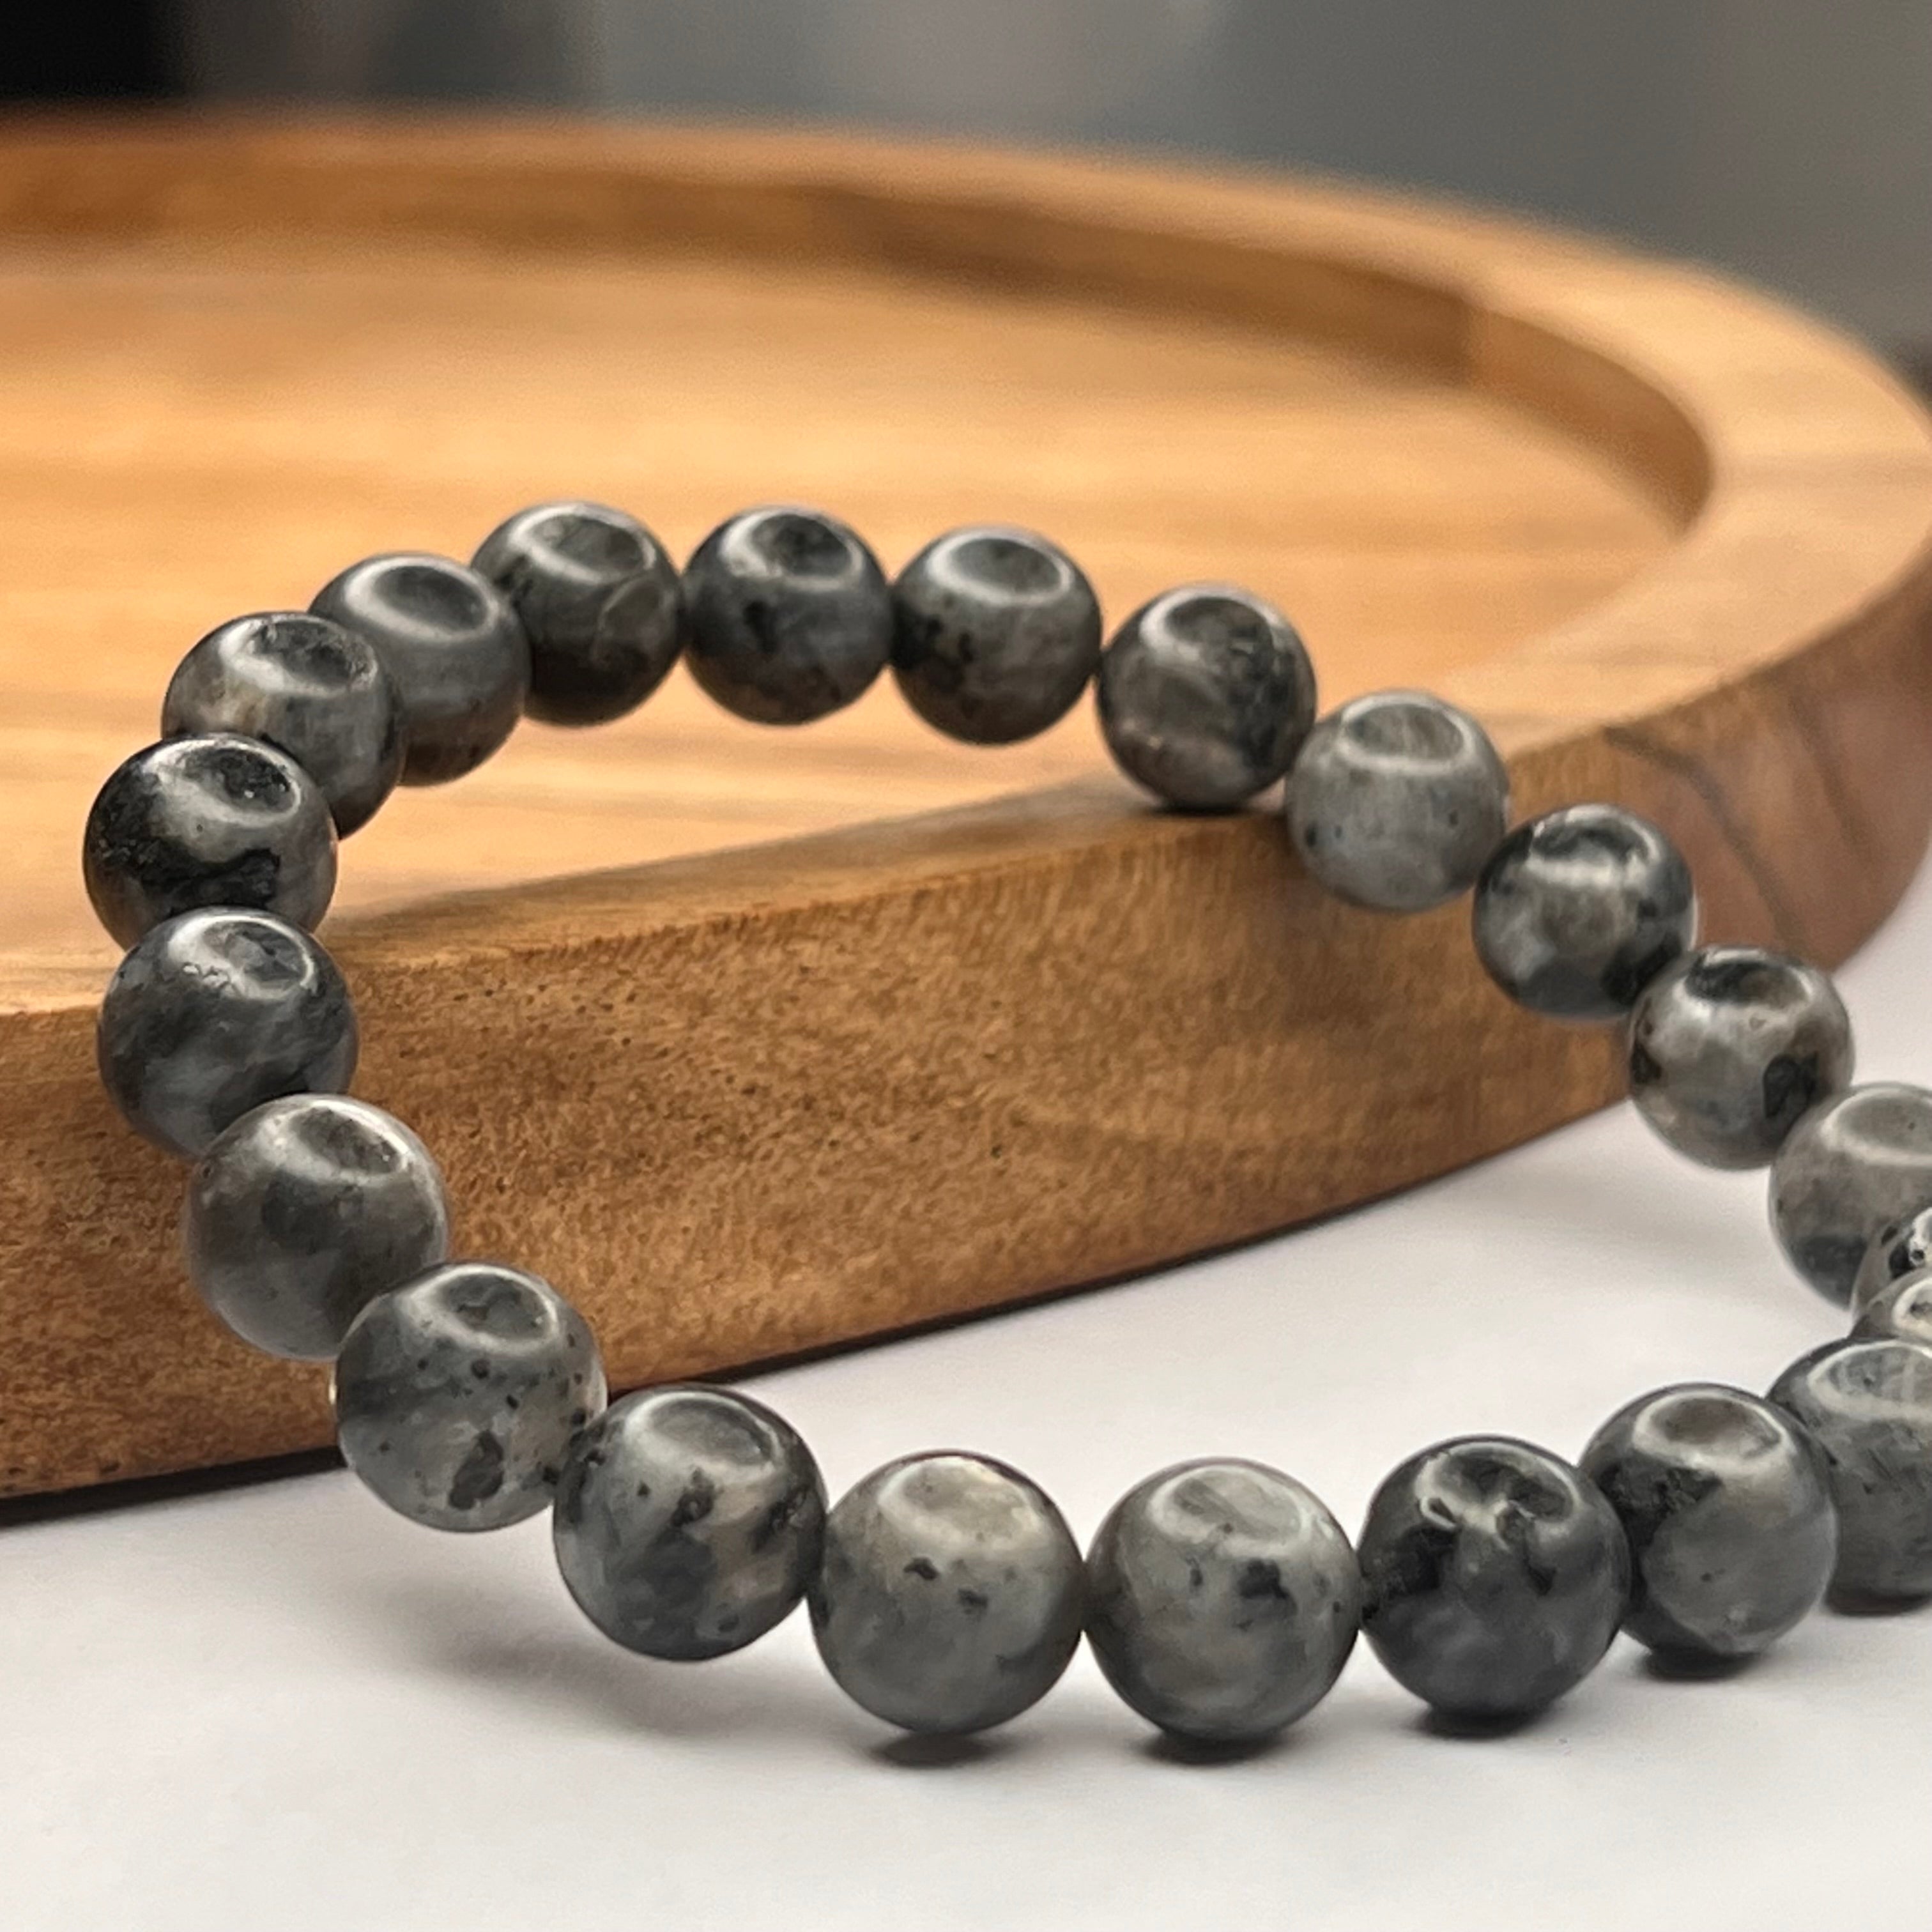 Black Tourmaline and White Moonstone Bead Bracelet | Made In Earth US